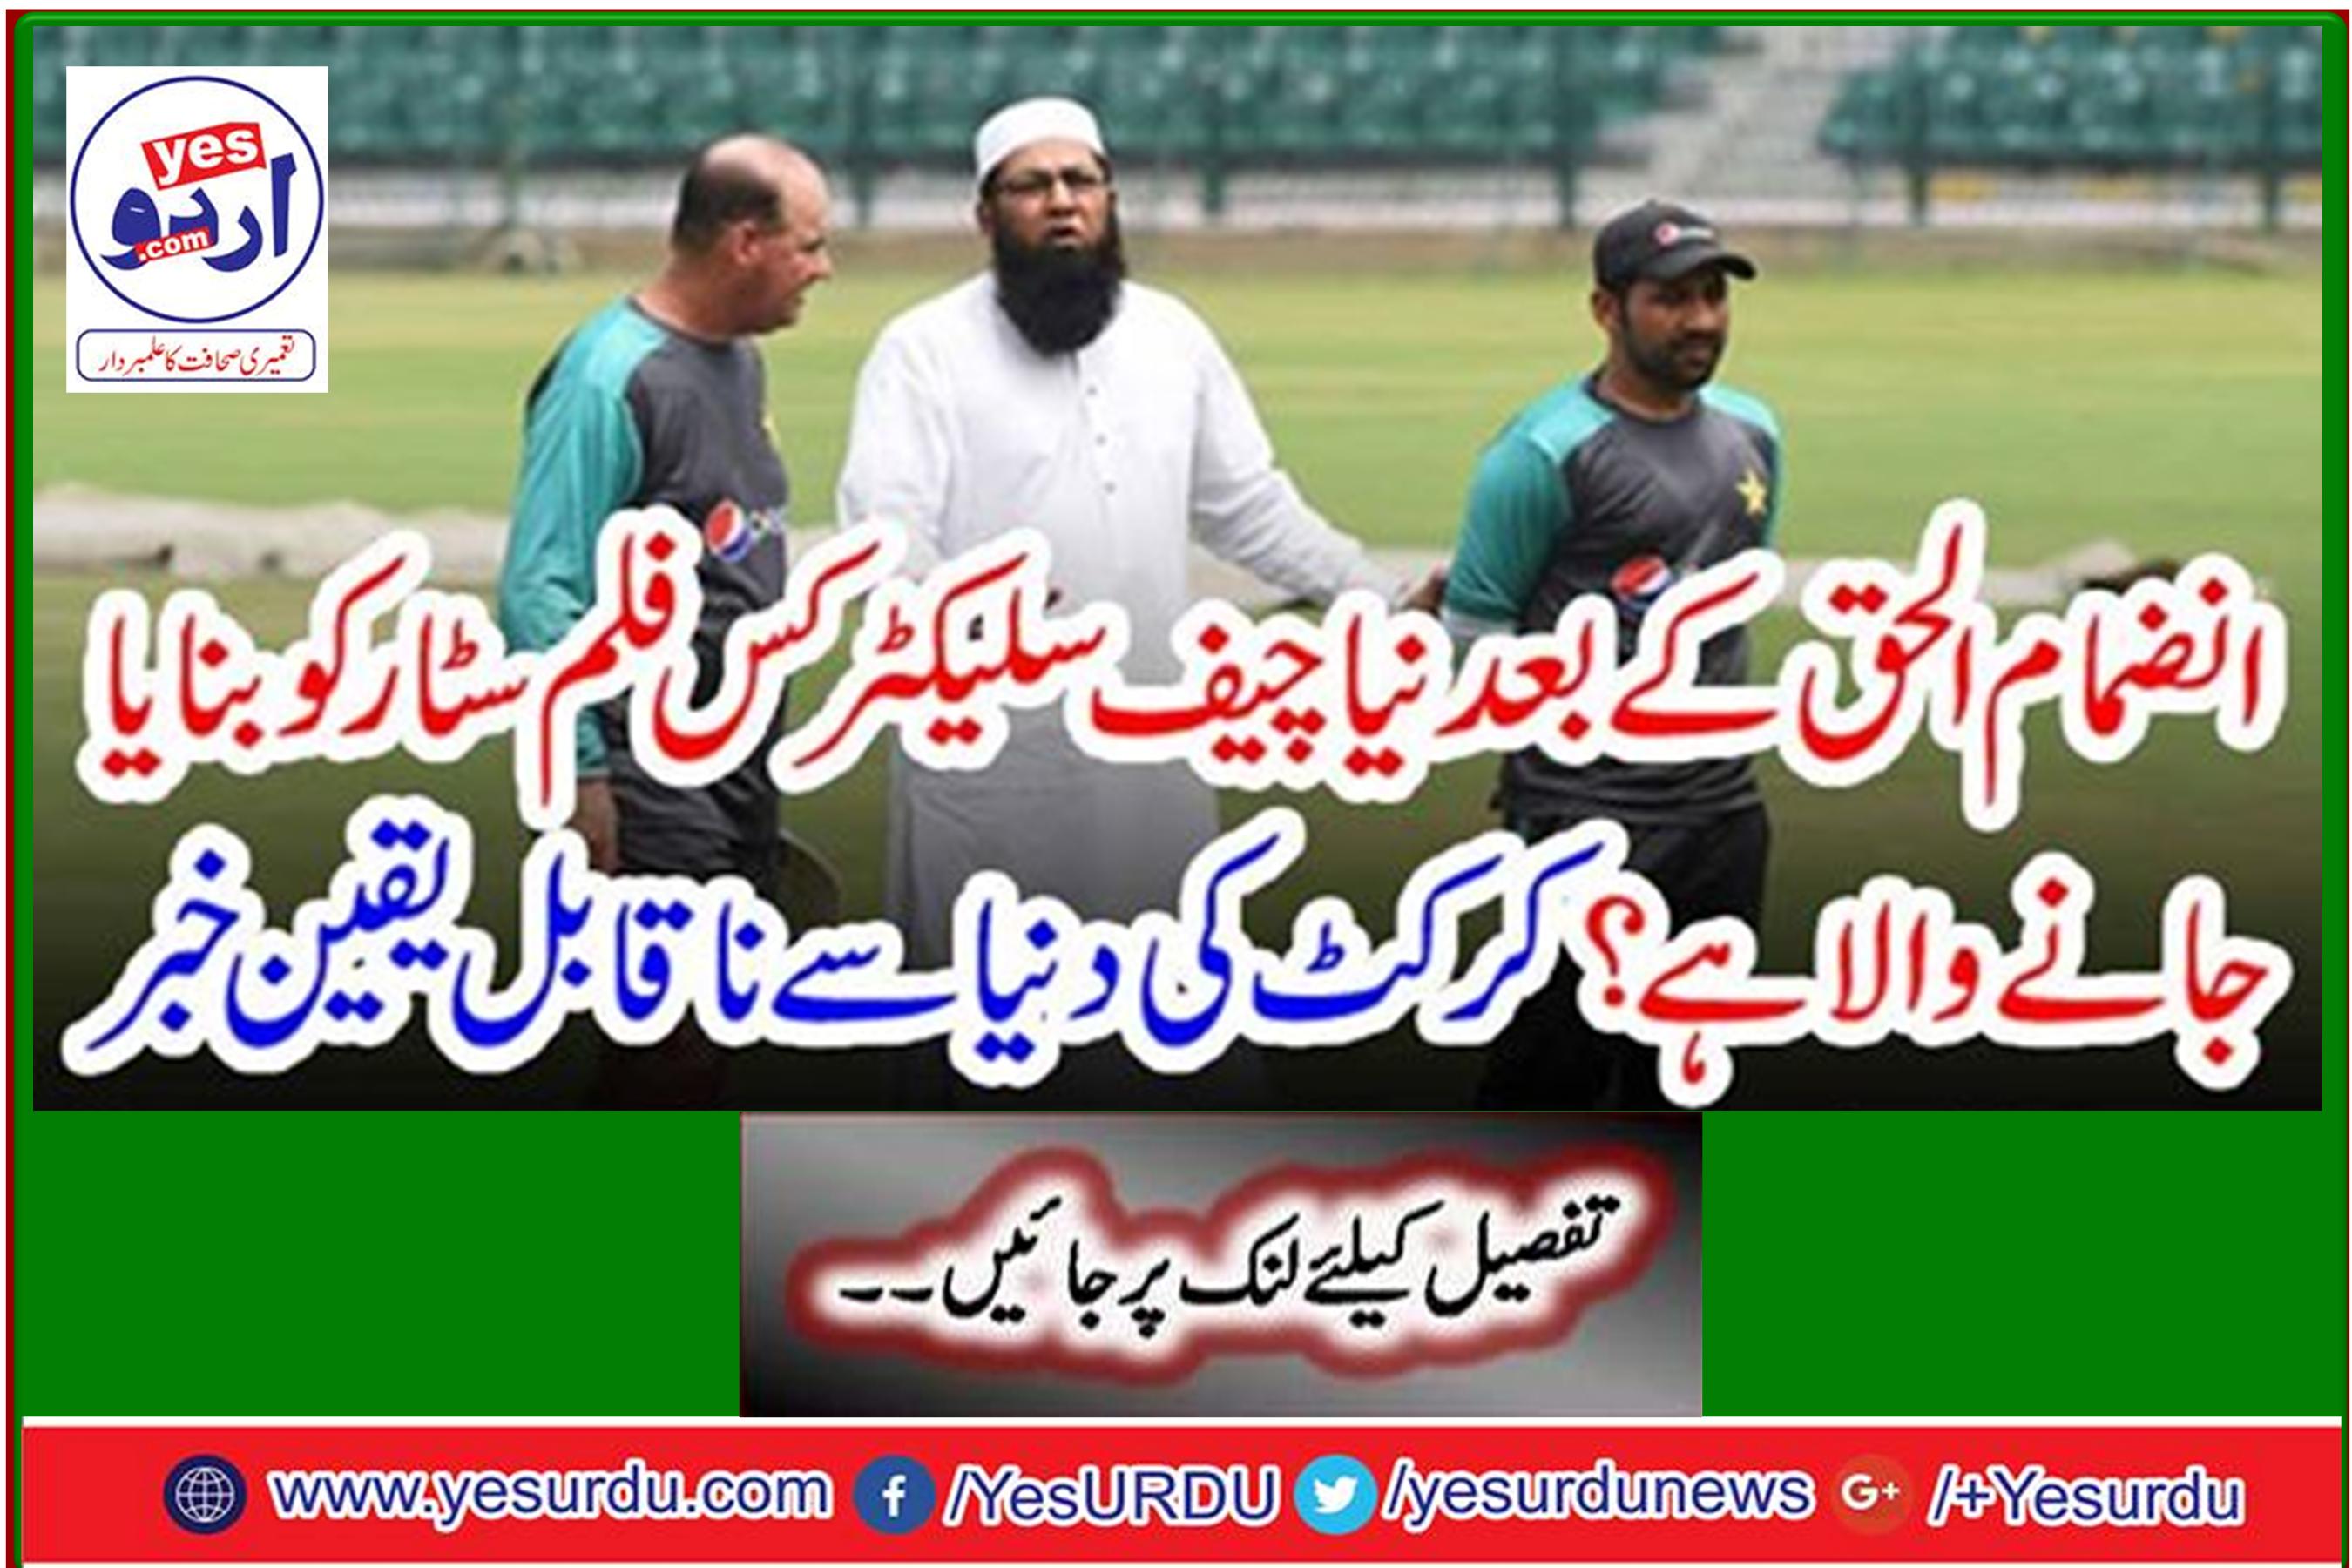 Which film star is the new chief selector after Inzamam-ul-Haq? Incredible news from the cricket world